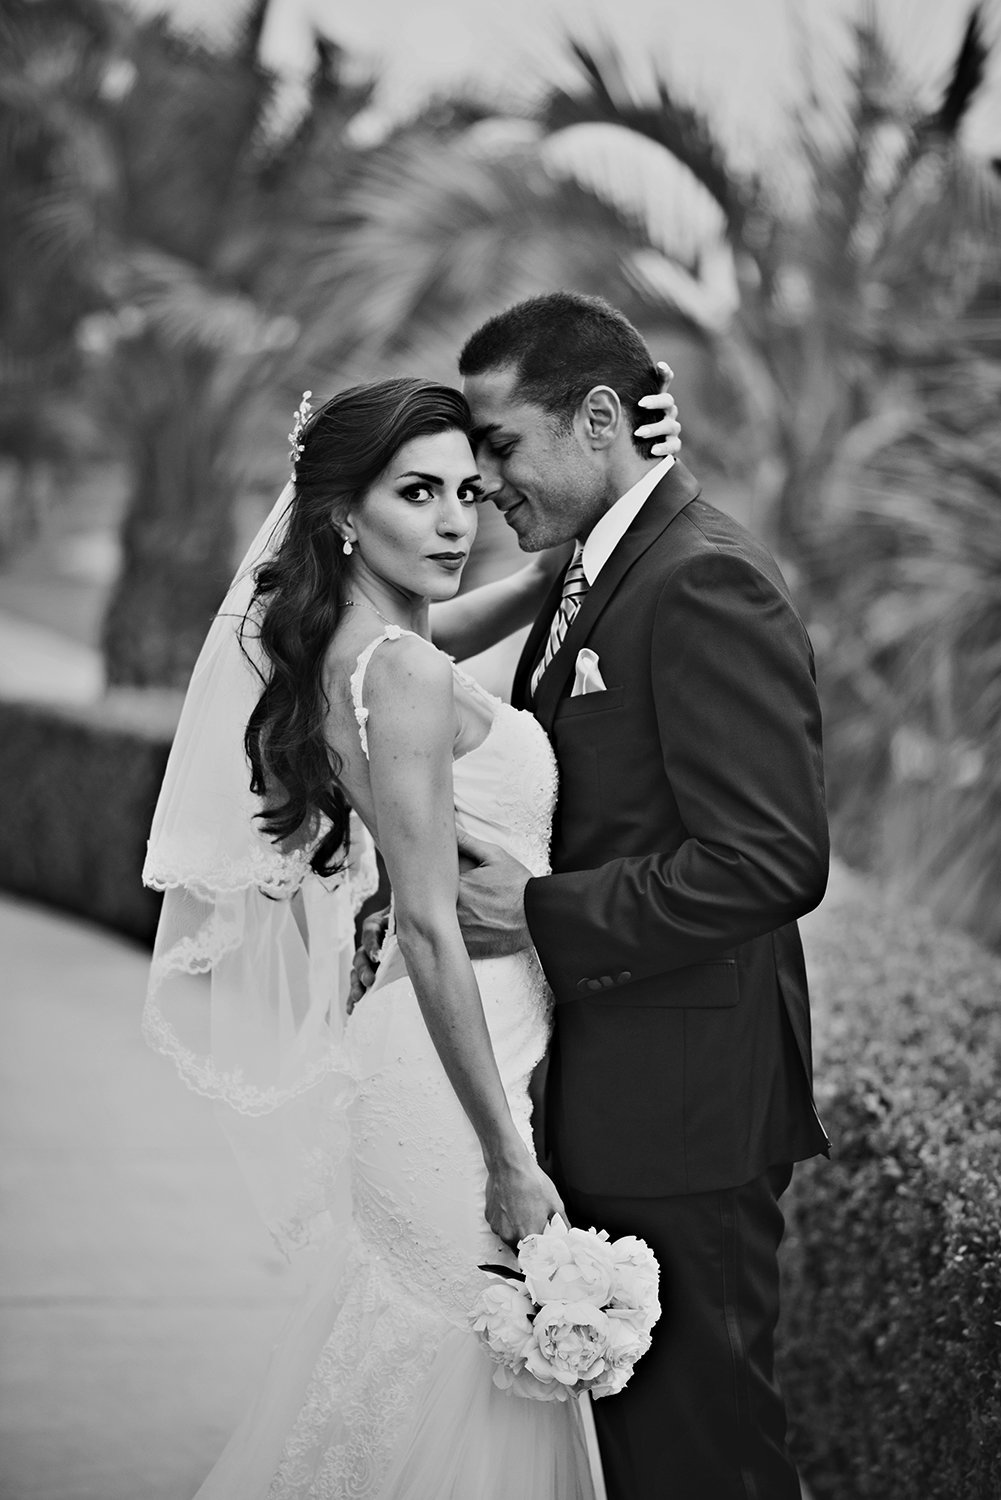 Striking black and white wedding portrait of a Persian Bride and Groom